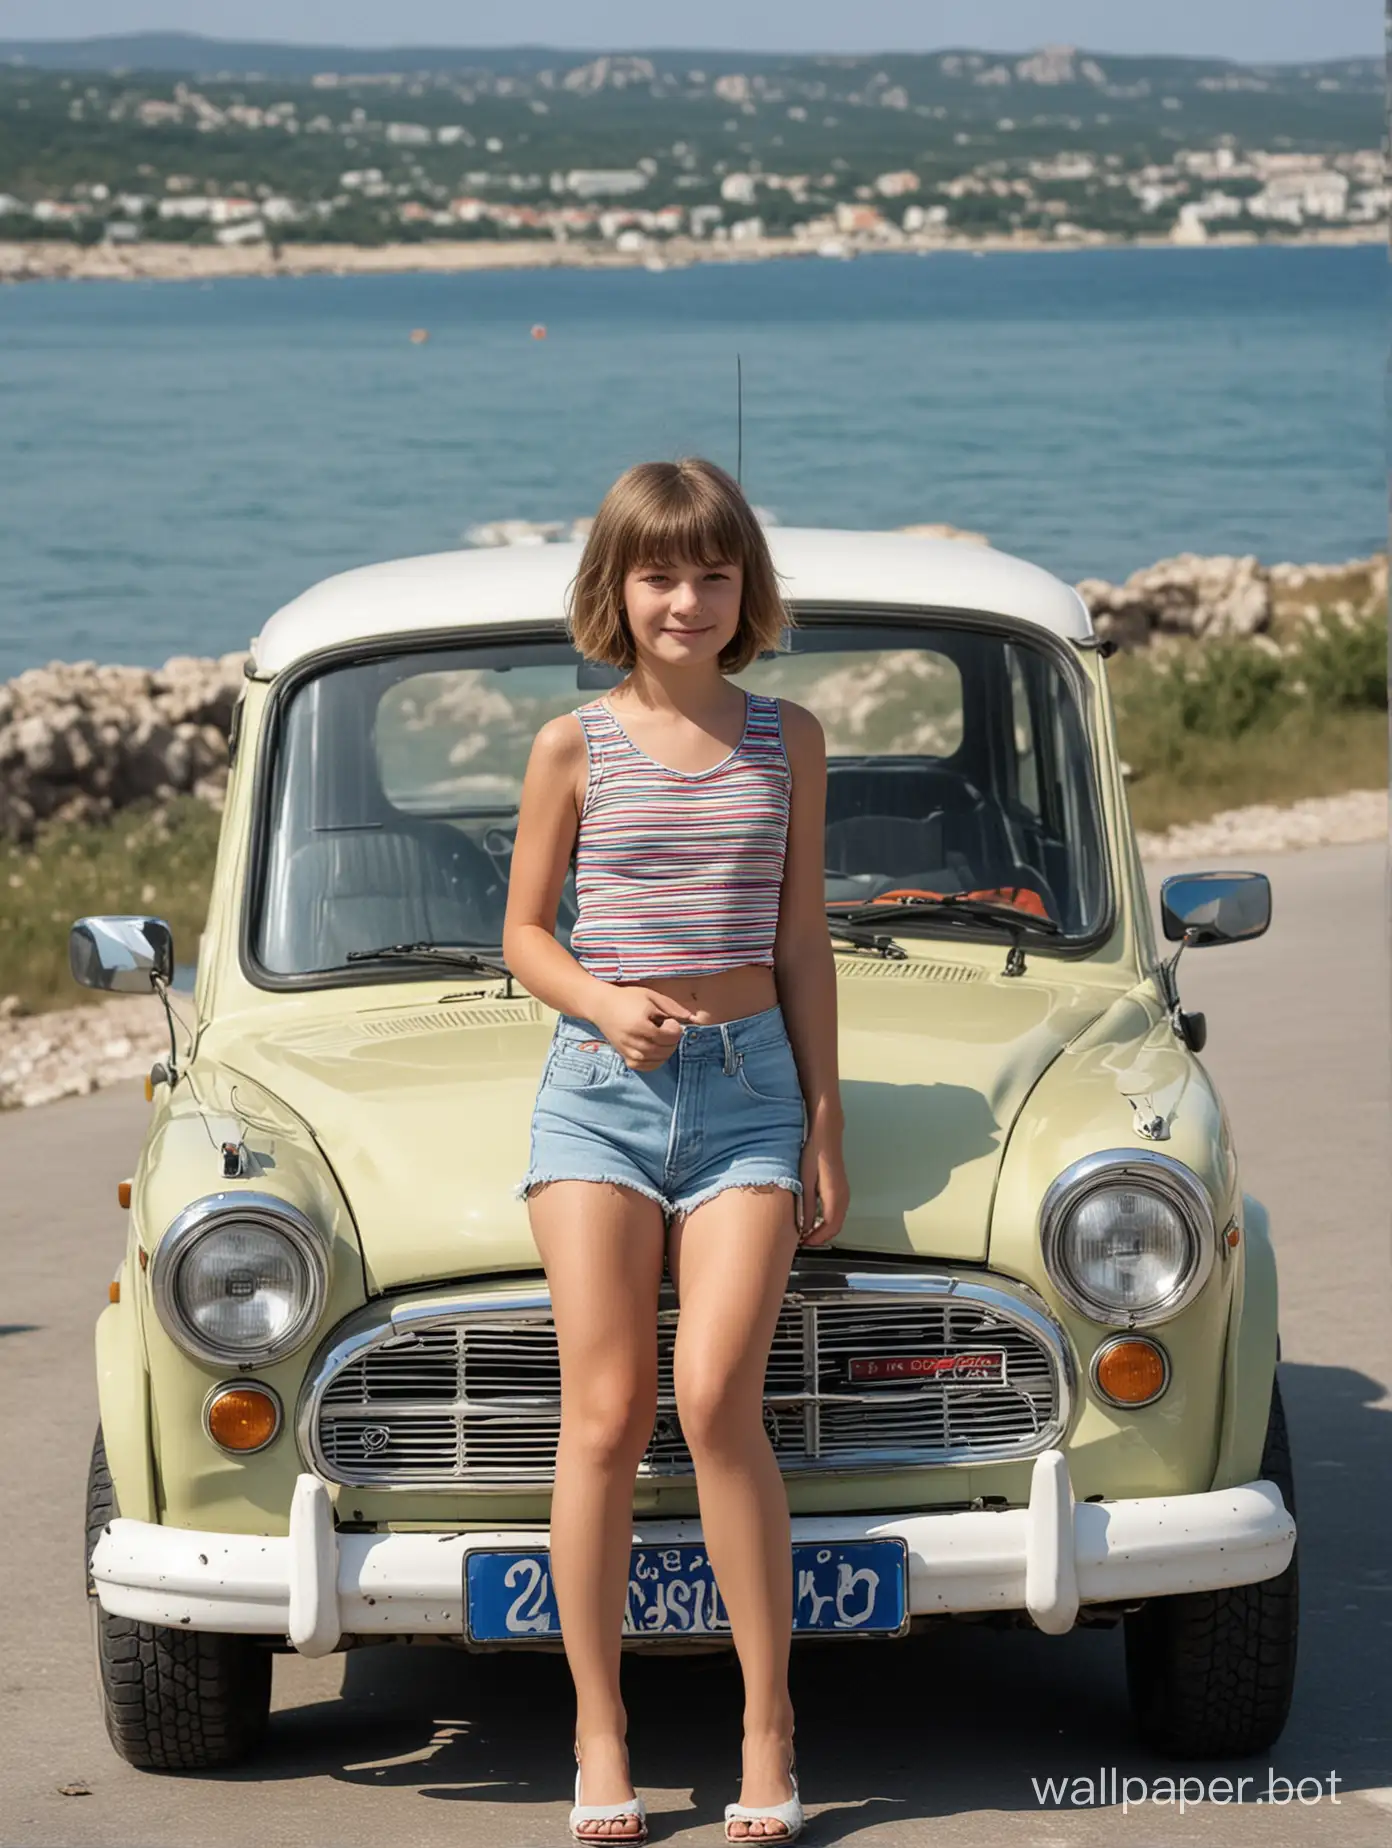 Crimea, a Moskvich car for hippies, sea view, an 11-year-old girl with a bob haircut in shorts